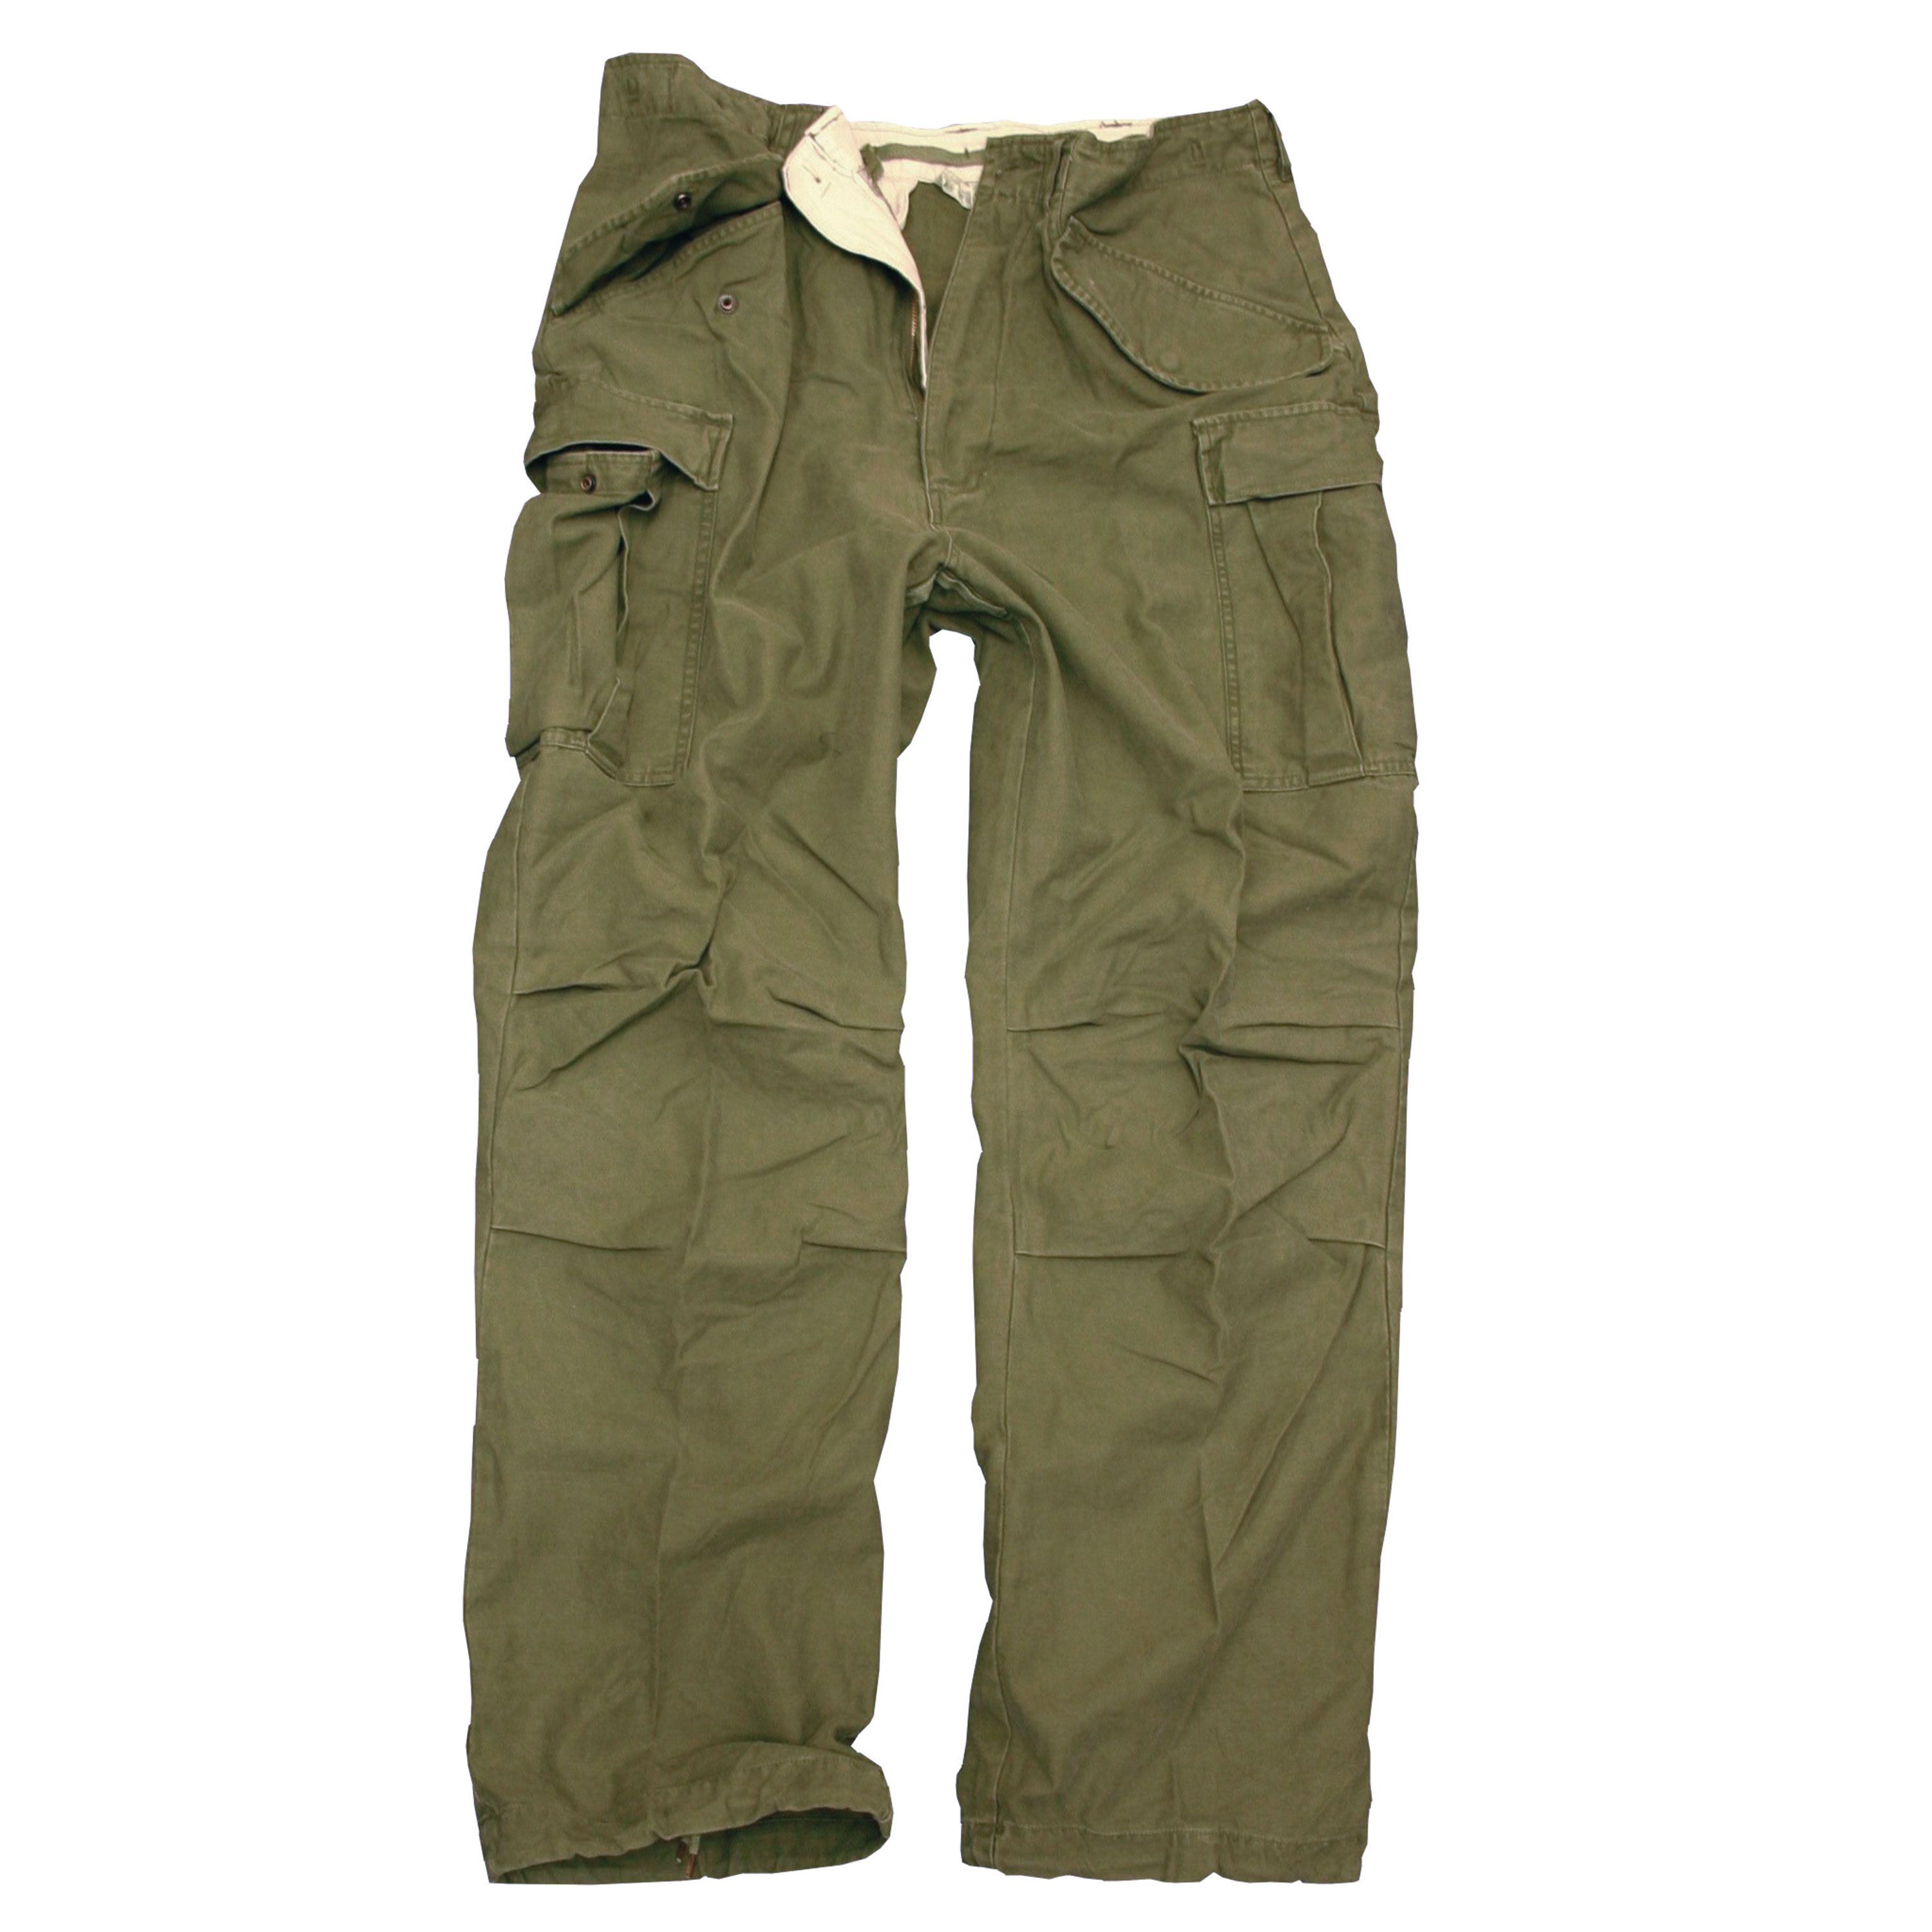 Purchase the Pants M-65 Washed olive green by ASMC